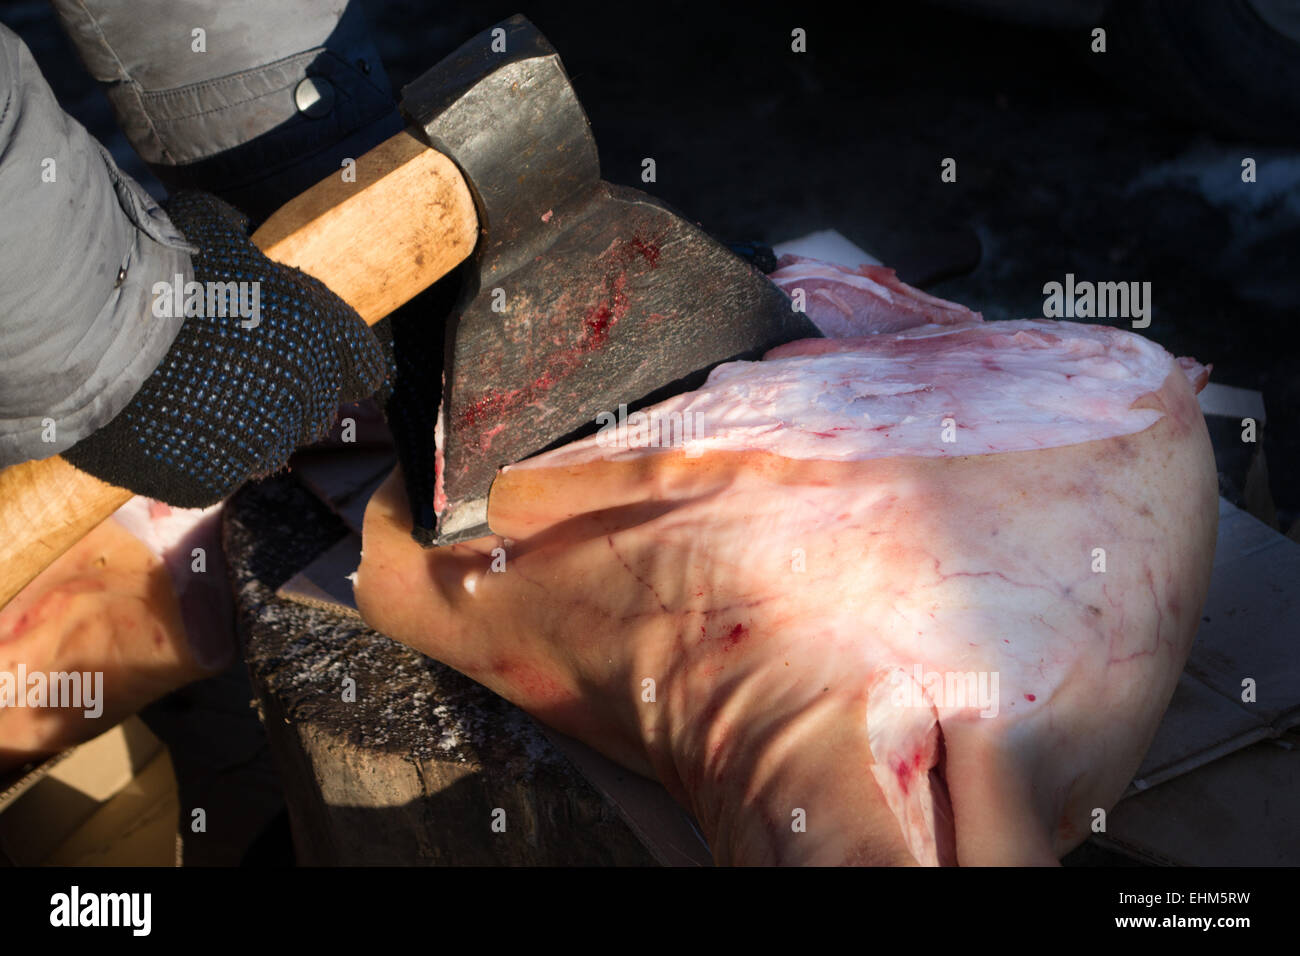 A butcher uses an axe to cut raw pork ready to sell Stock Photo